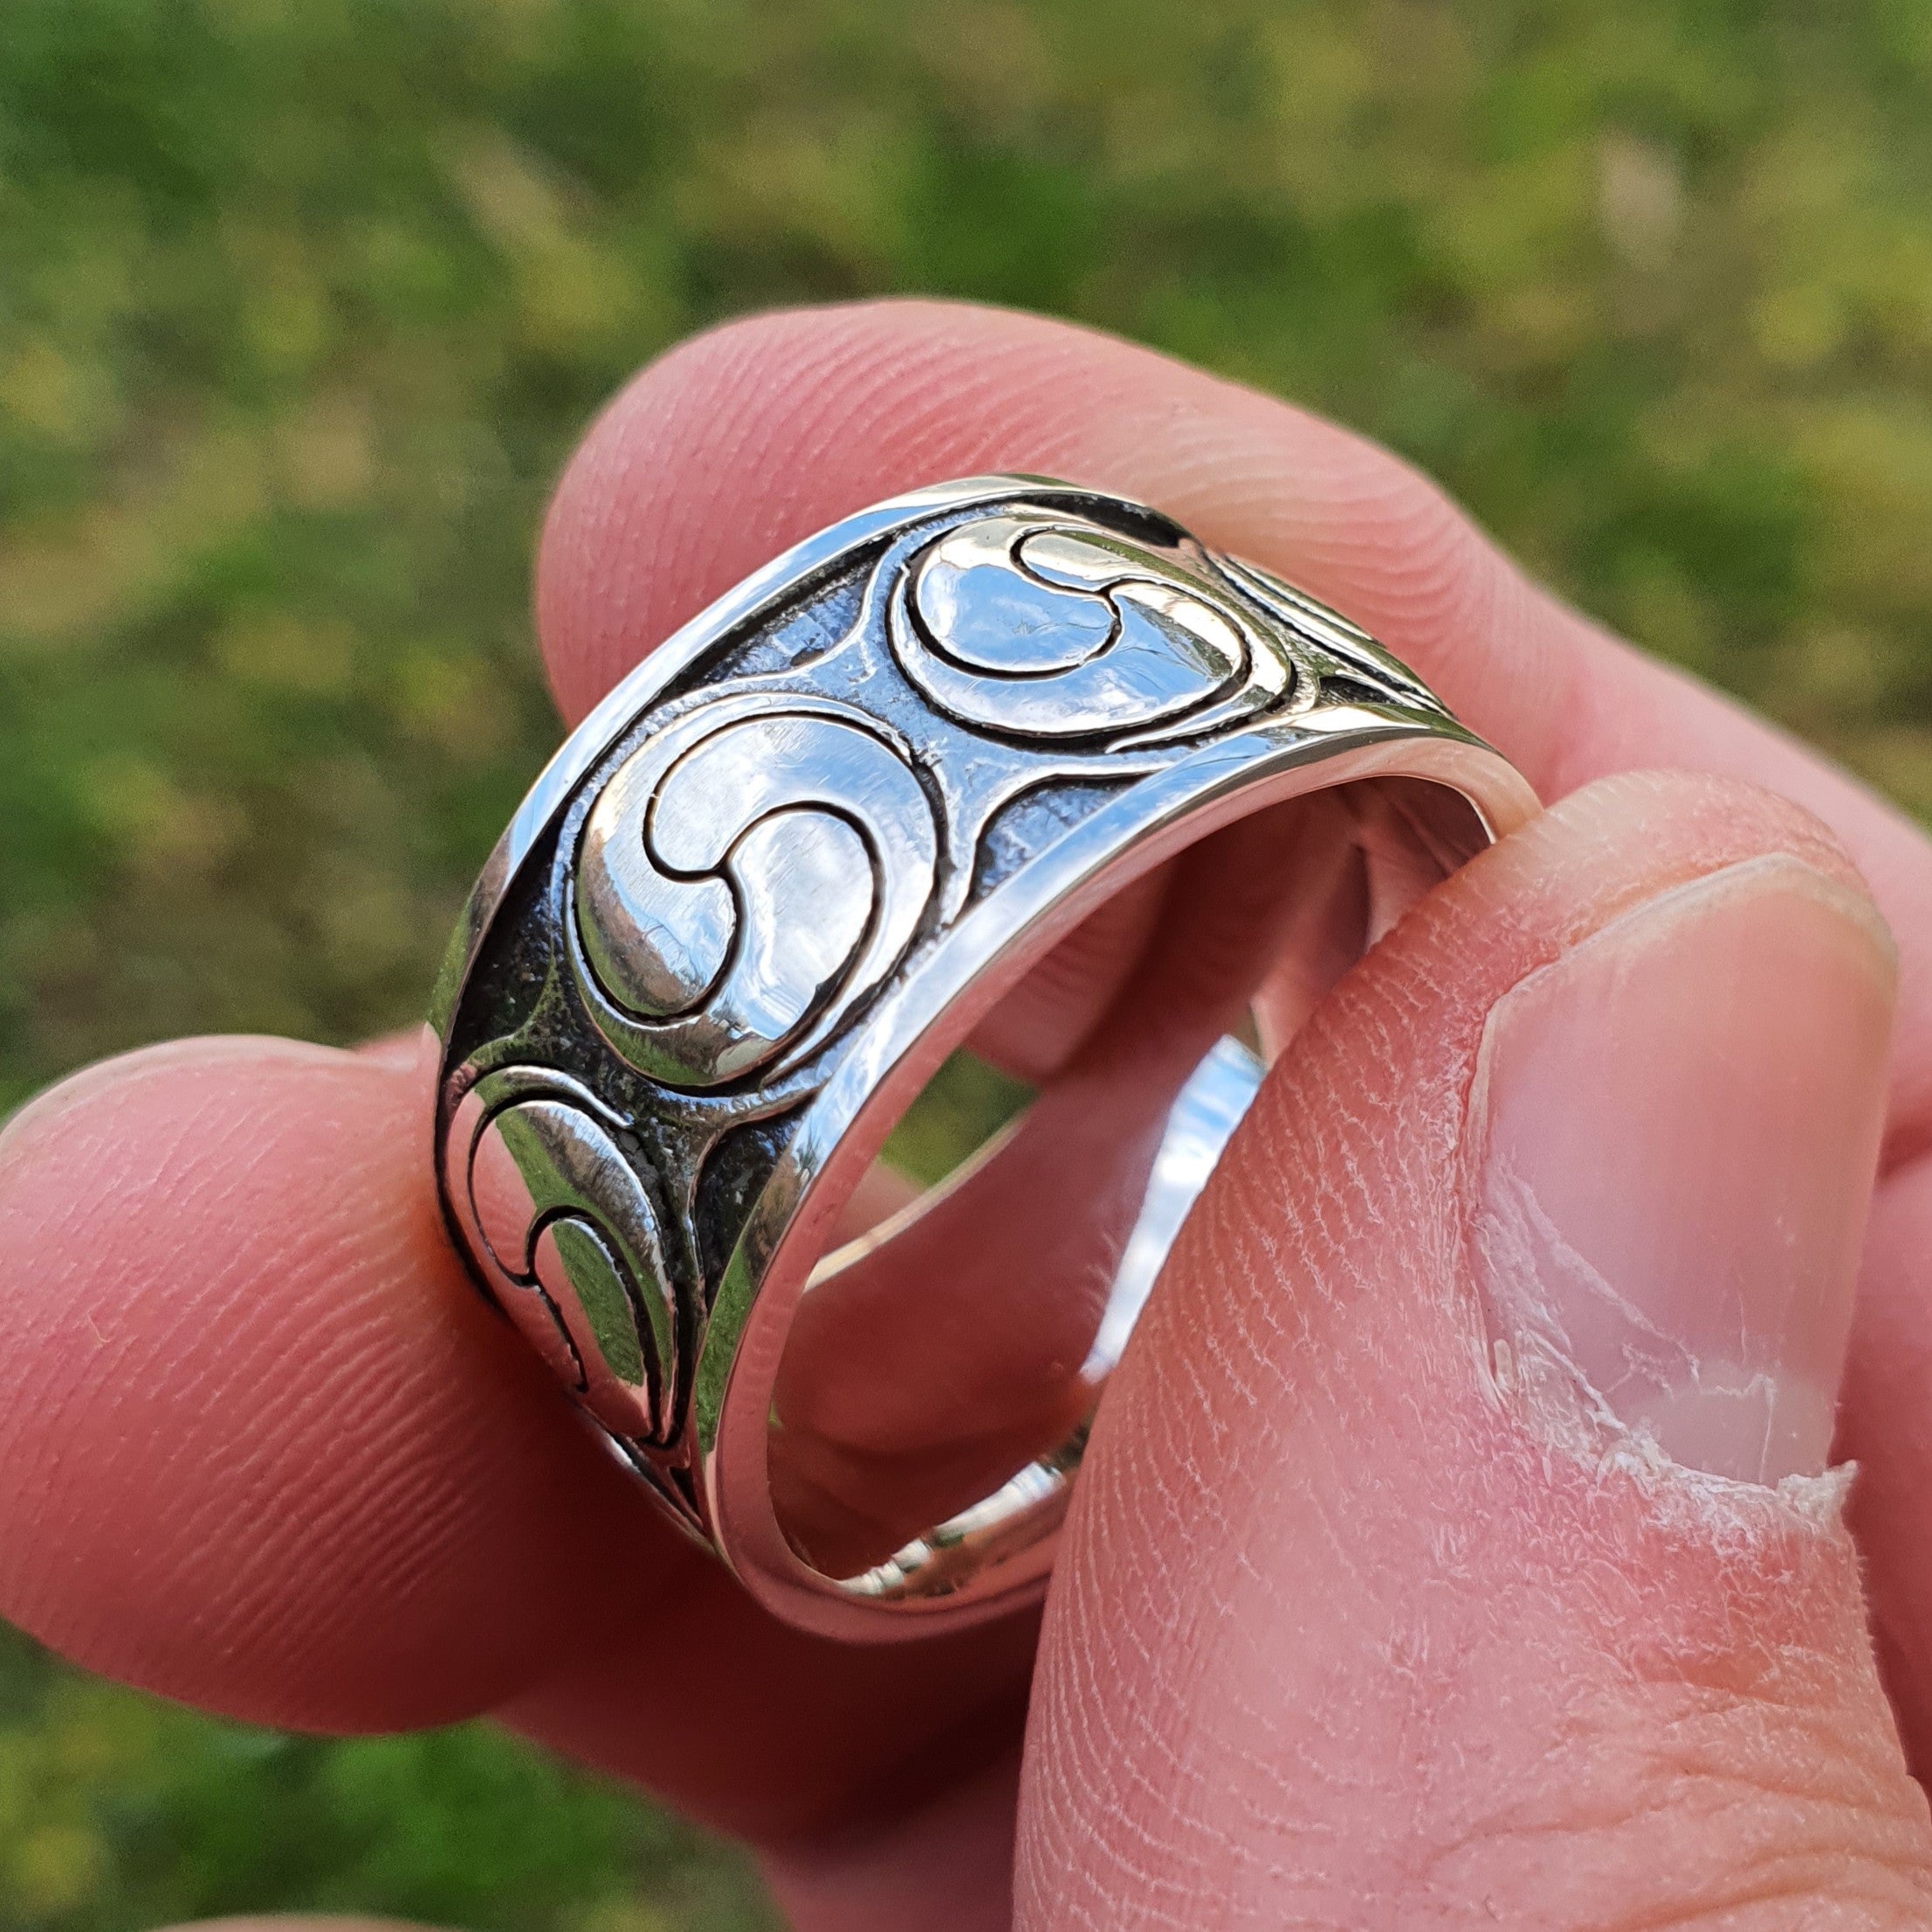 Sterling silver manufactured using wax casting, polished for a slightly textured, mild sheen surface, and recessed details blackened for a steampunk look.